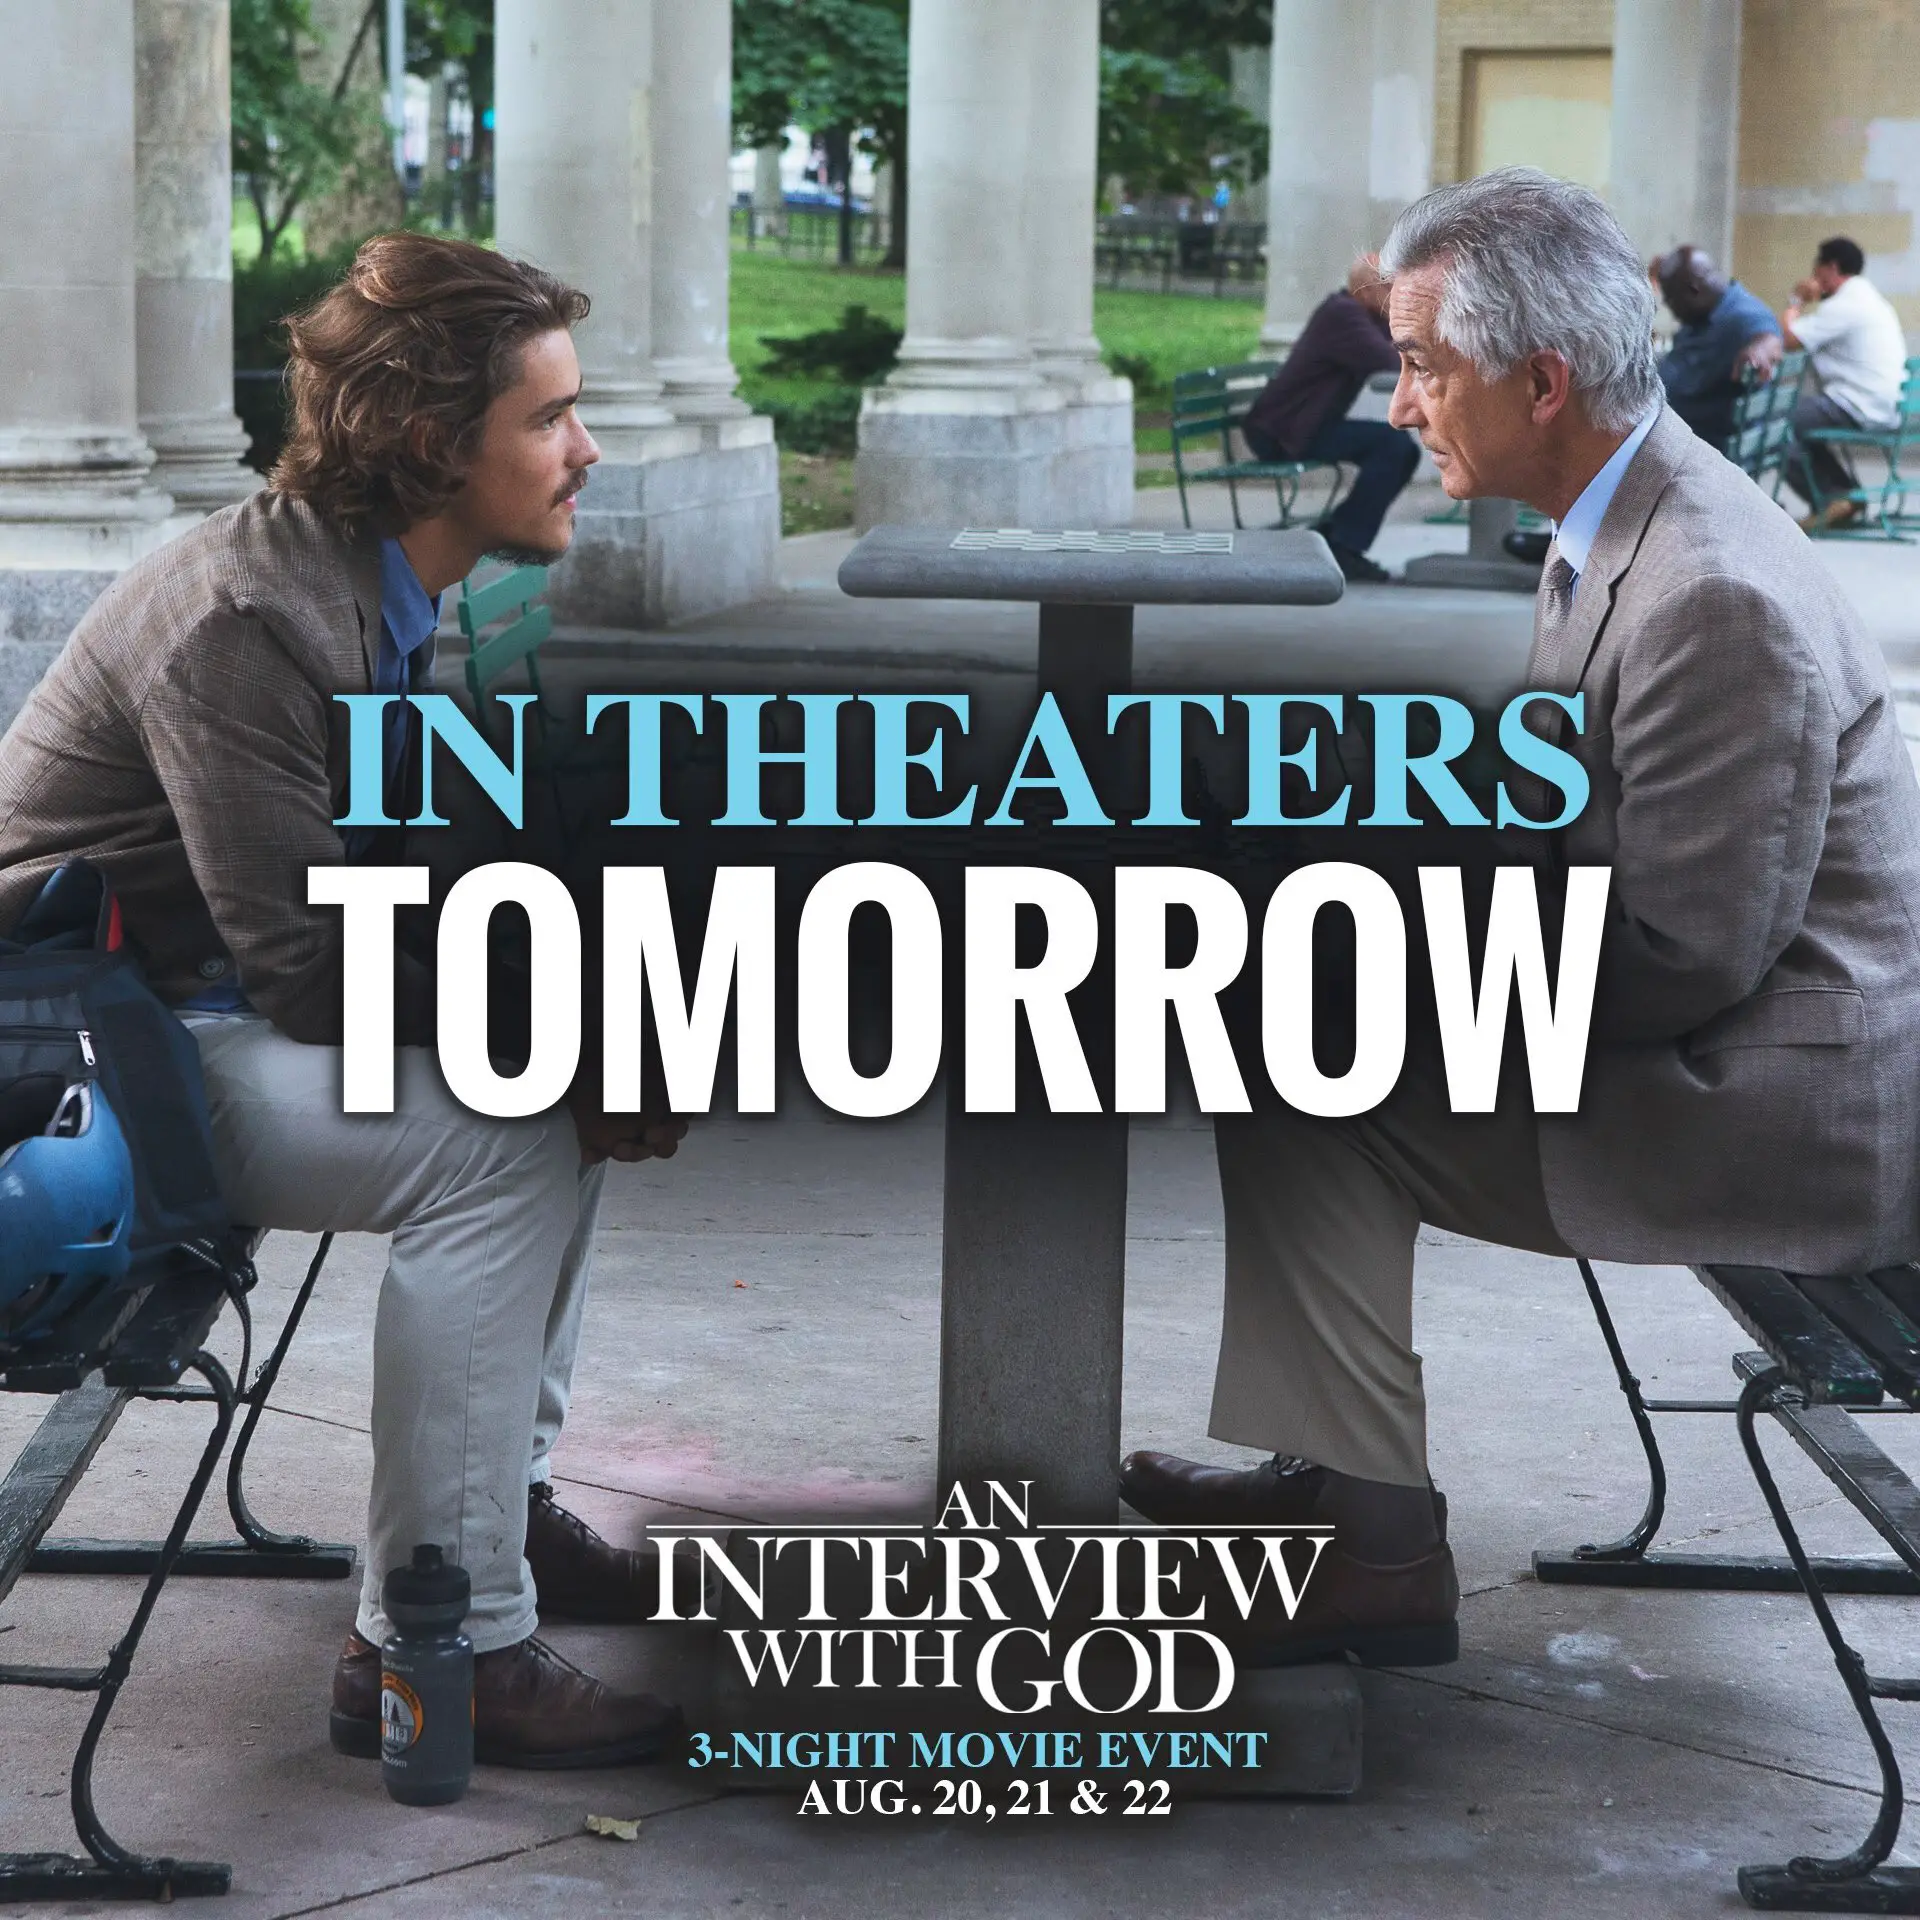 An Interview With God Movie on Twitter: " If you know someone that has ...